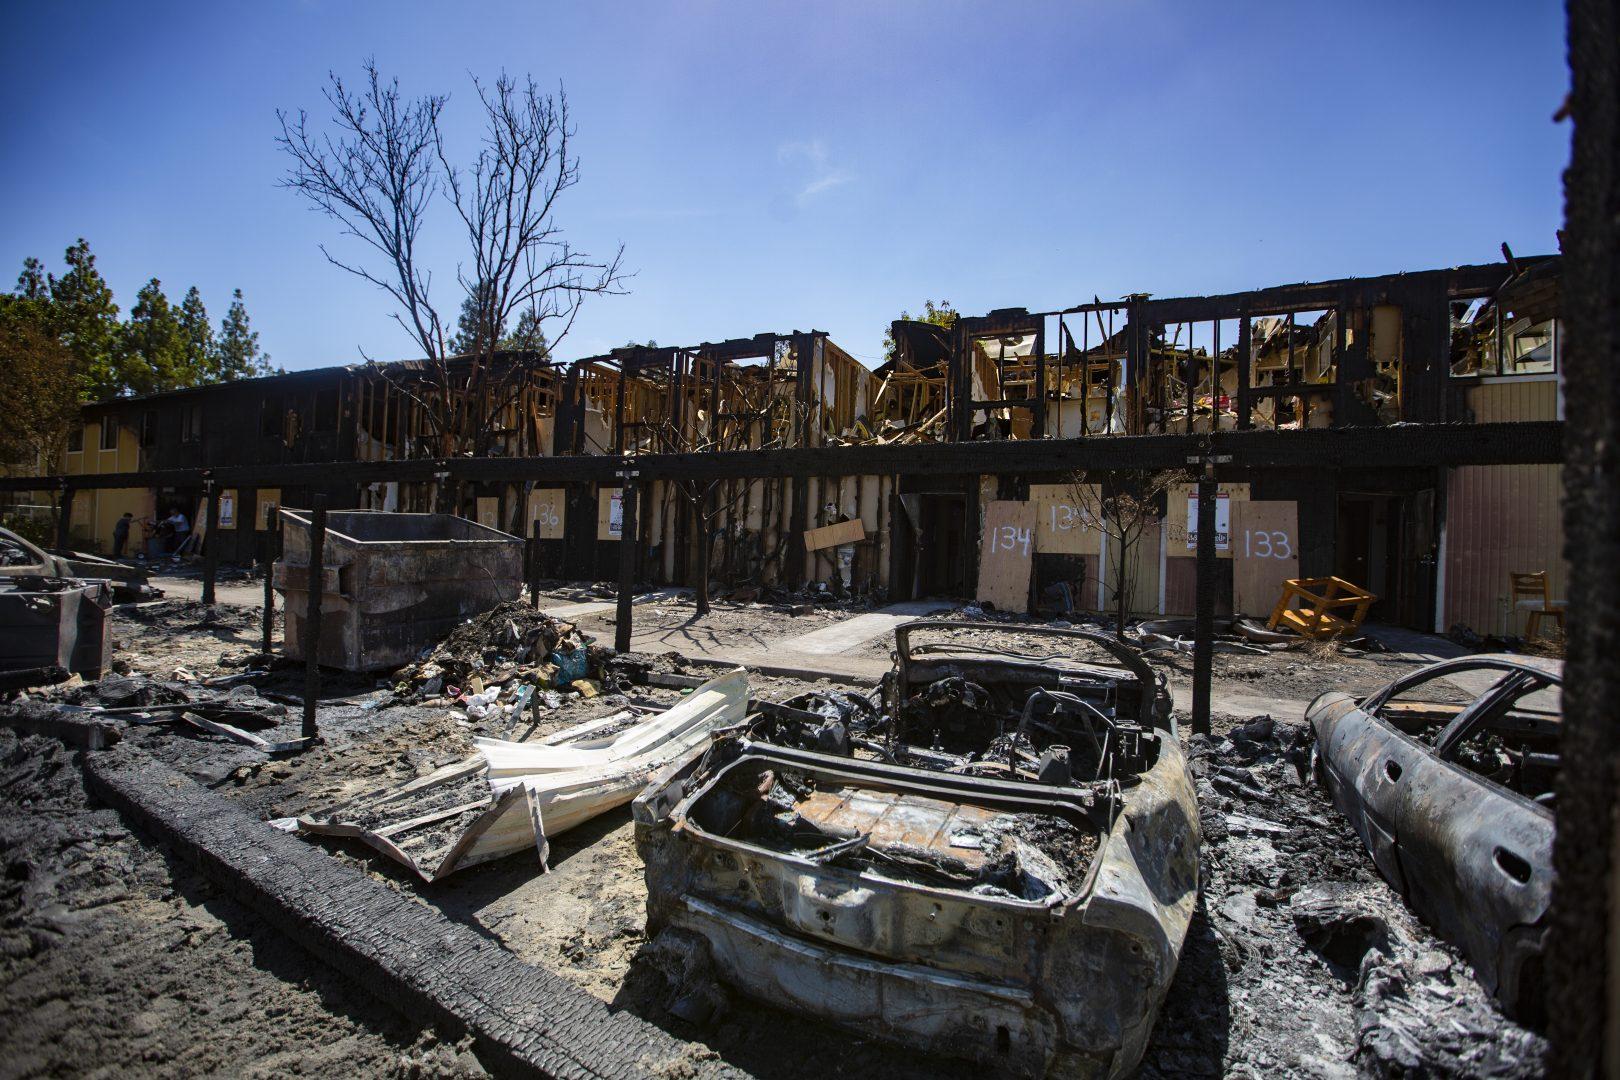 Aftermath of a blaze at Maplewood Apartment Complex across from Fresno State on Friday, Aug. 23, 2019. At least 15 students were displaced and eight units in the complex were destroyed. (Larry Valenzuela/The Collegian)